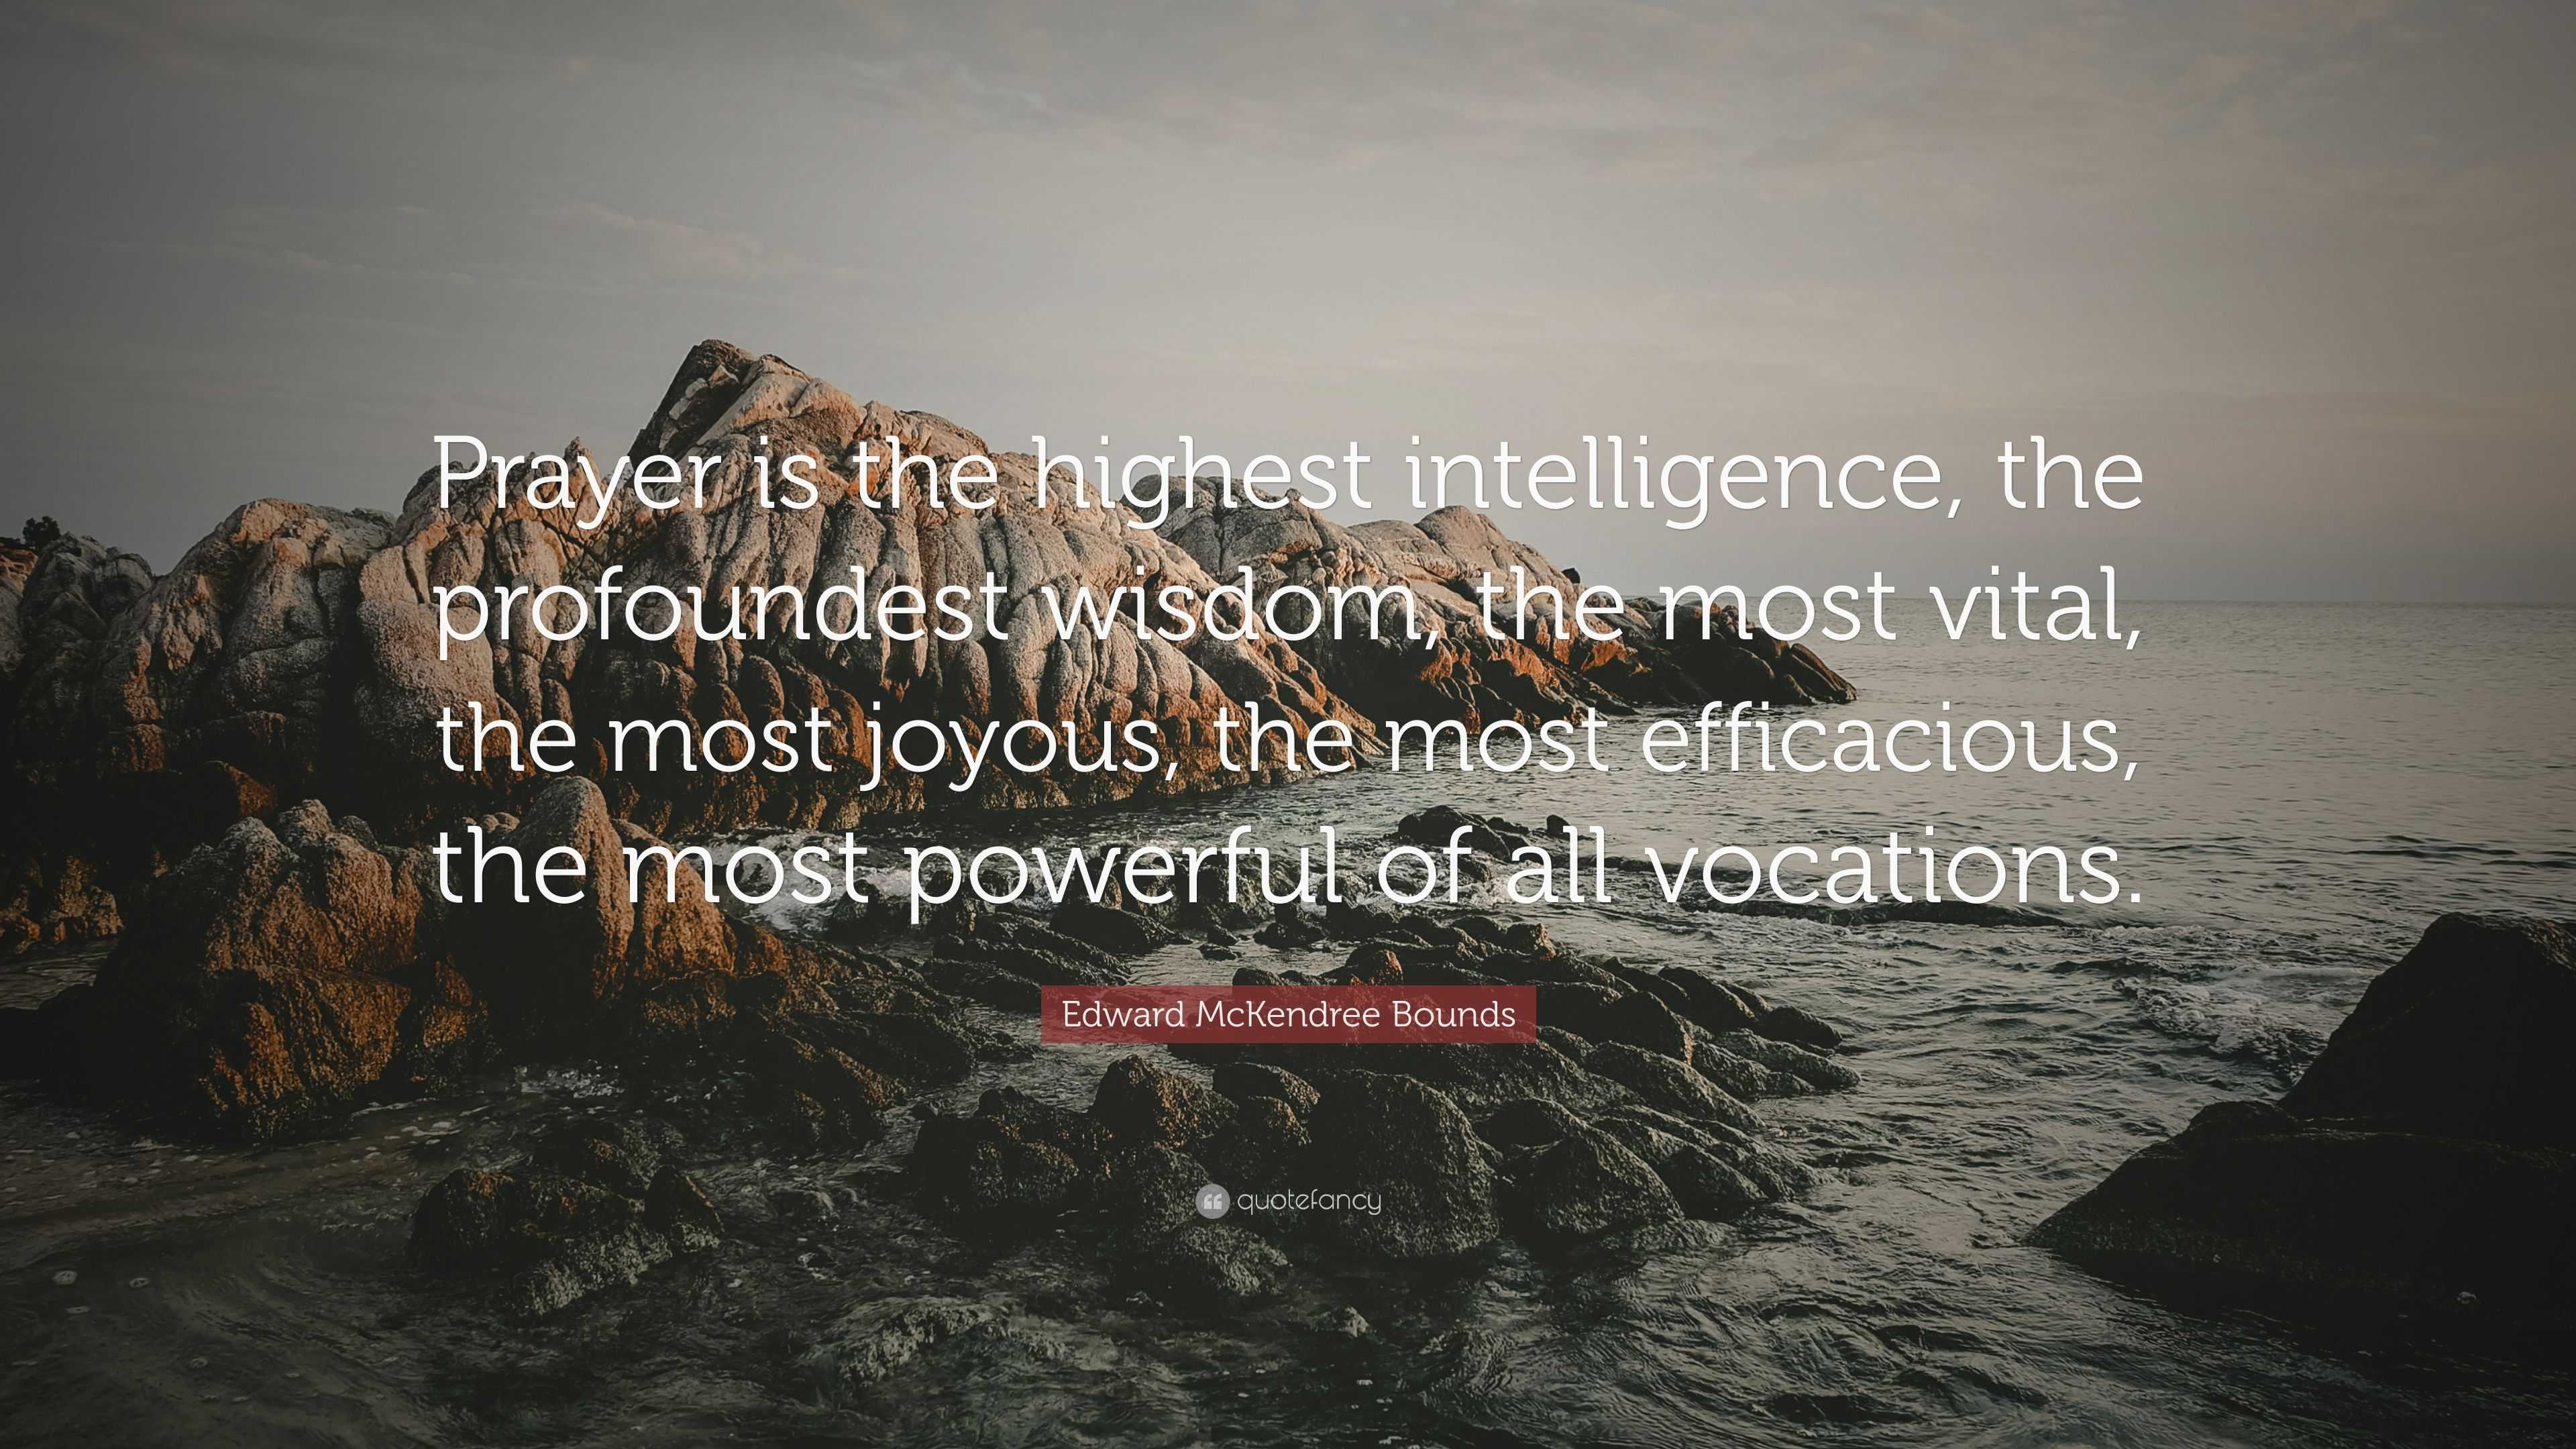 Edward McKendree Bounds Quote: “Prayer is the highest intelligence, the ...